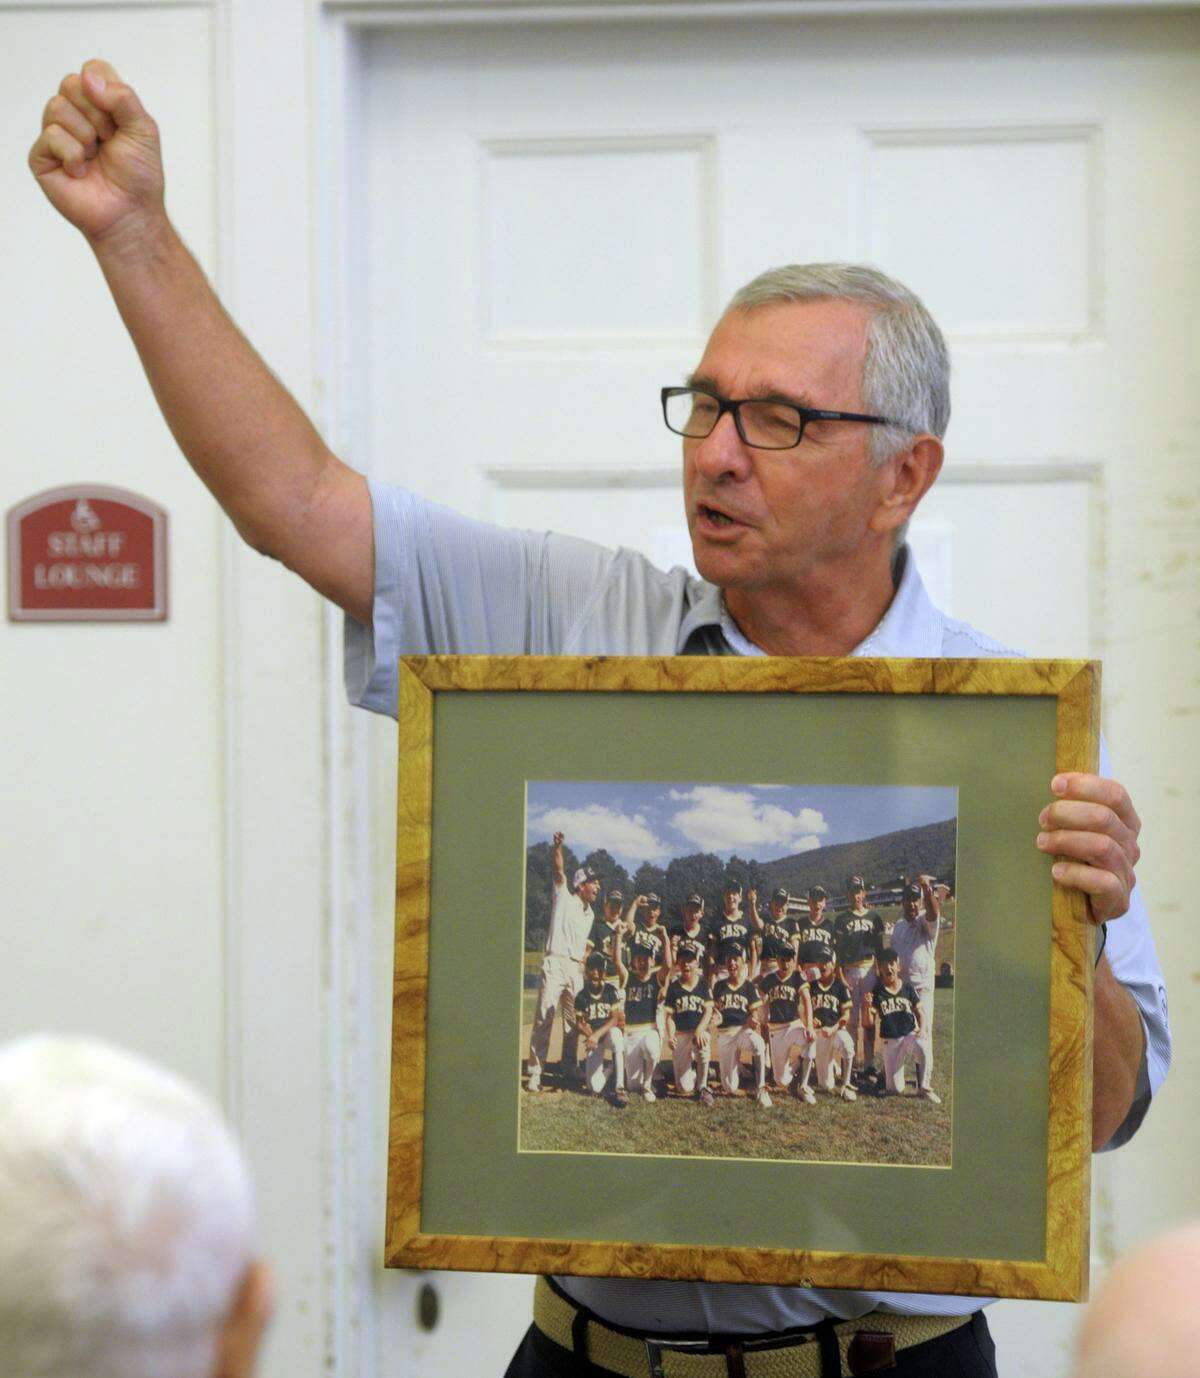 Tom Galla, who coached the Trumbull National baseball team that won the 1989 Little League World Series, holds a photograph of the team as he speaks during the regular Silver Sluggers program at the Derby Public Library last week. This month marks the 30th anniversary of Trumbull’s World Series Championship.